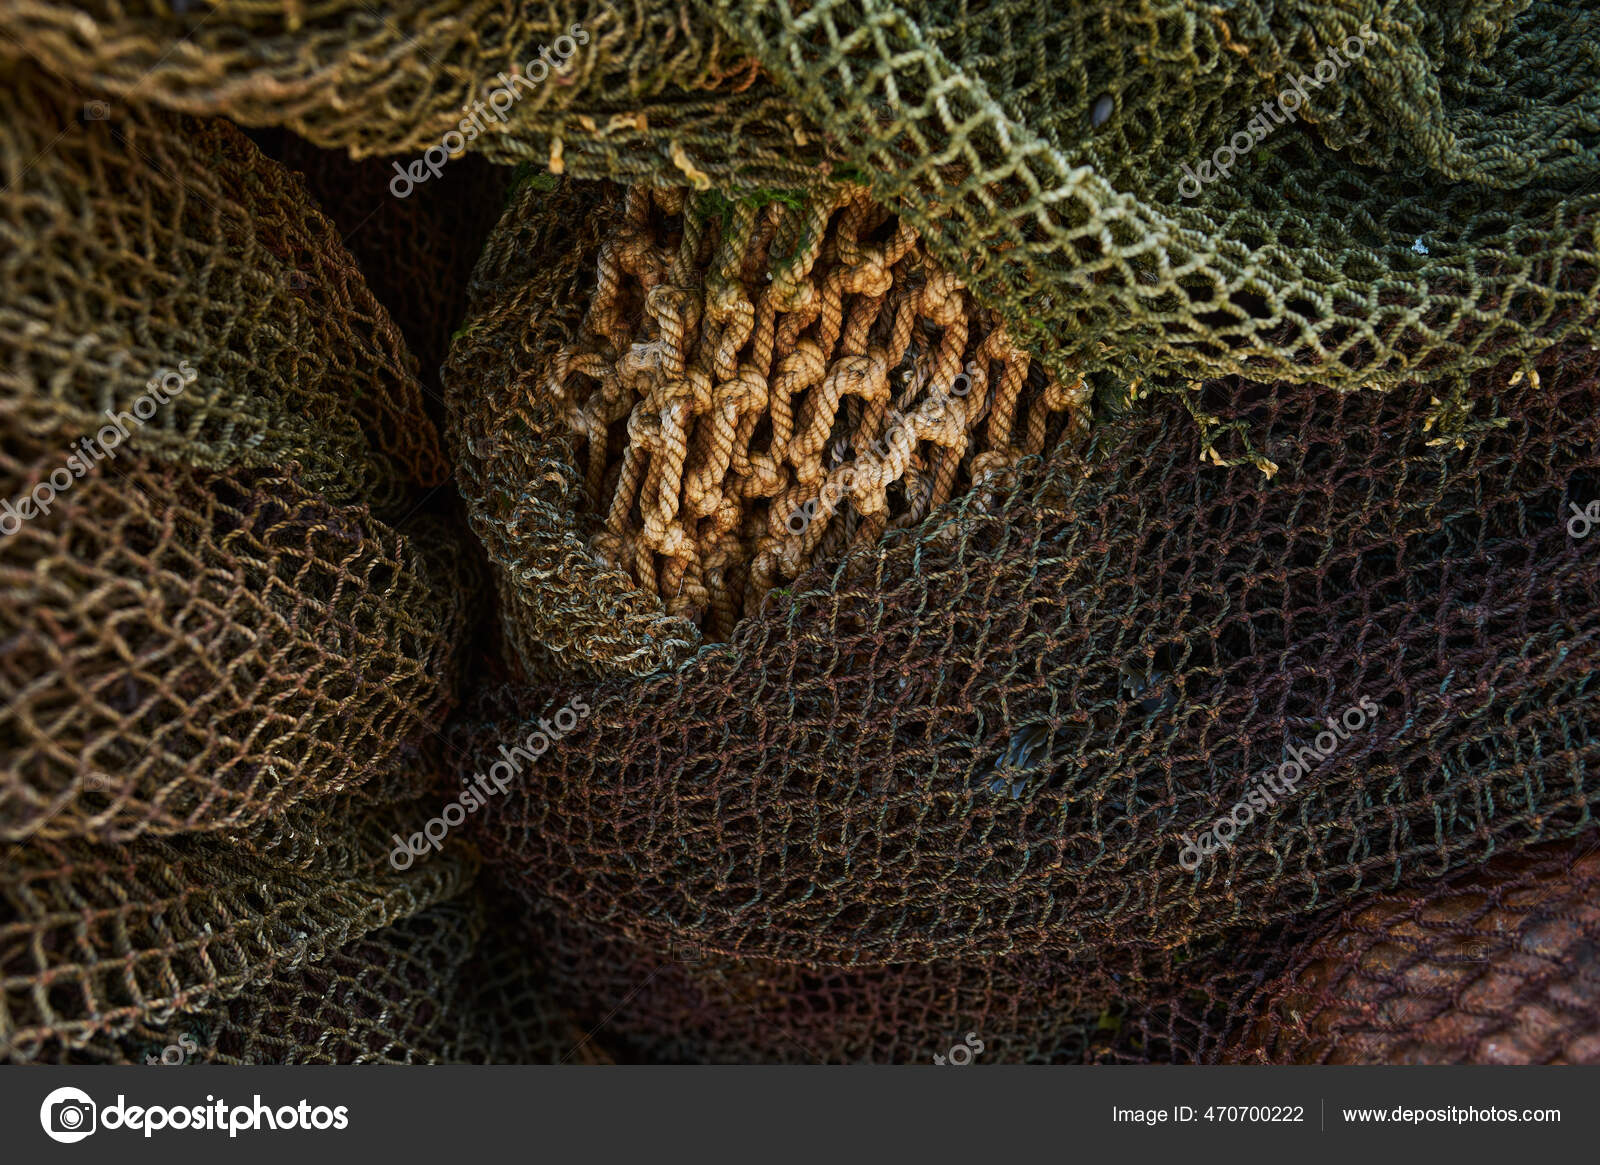 A fishing net is a net used for fishing. Nets are devices made from fibers  woven